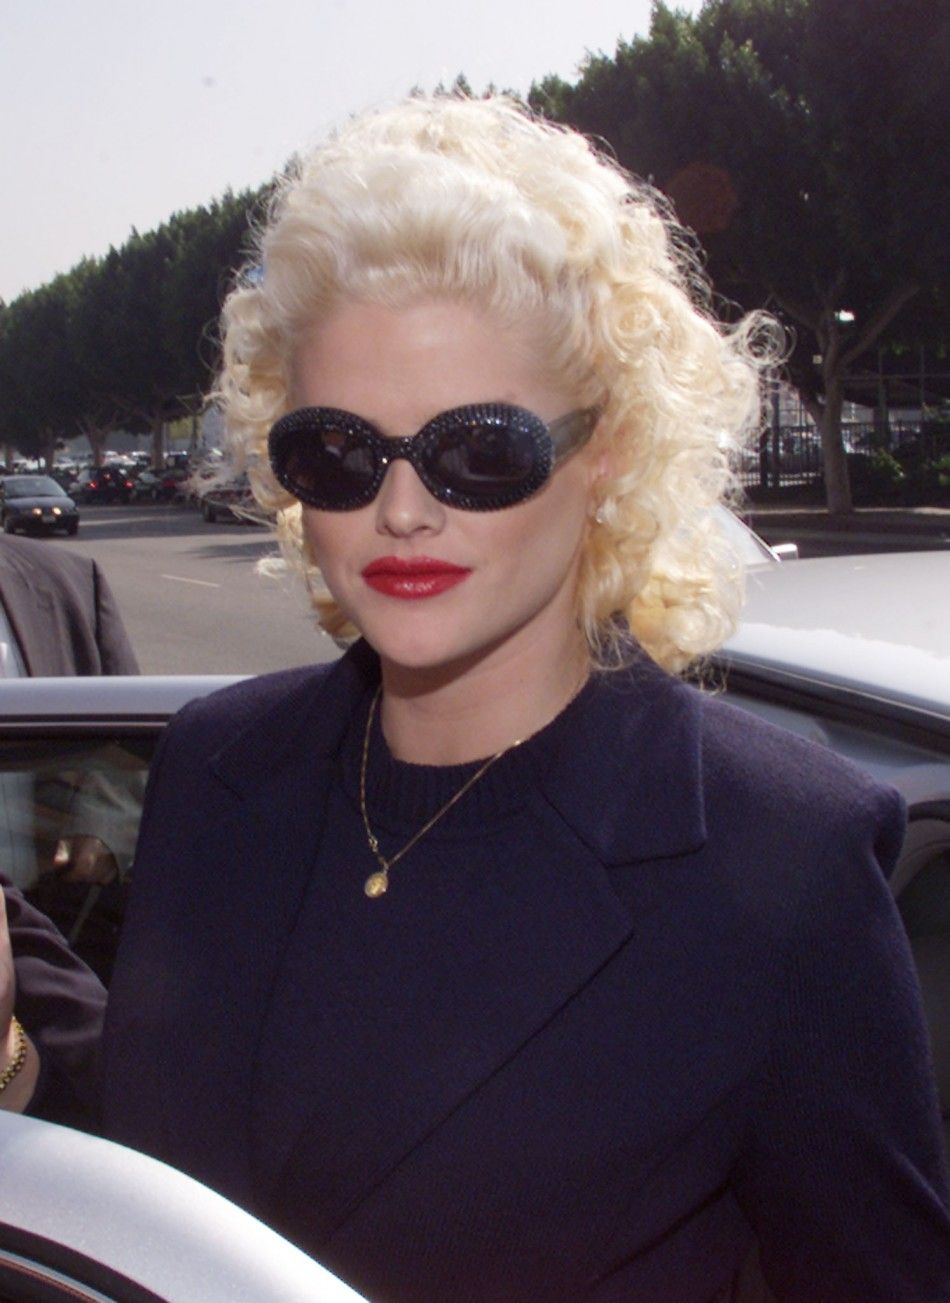 ANNA NICOLE SMITH ARRIVES FOR BANKRUPTCY HEARING.